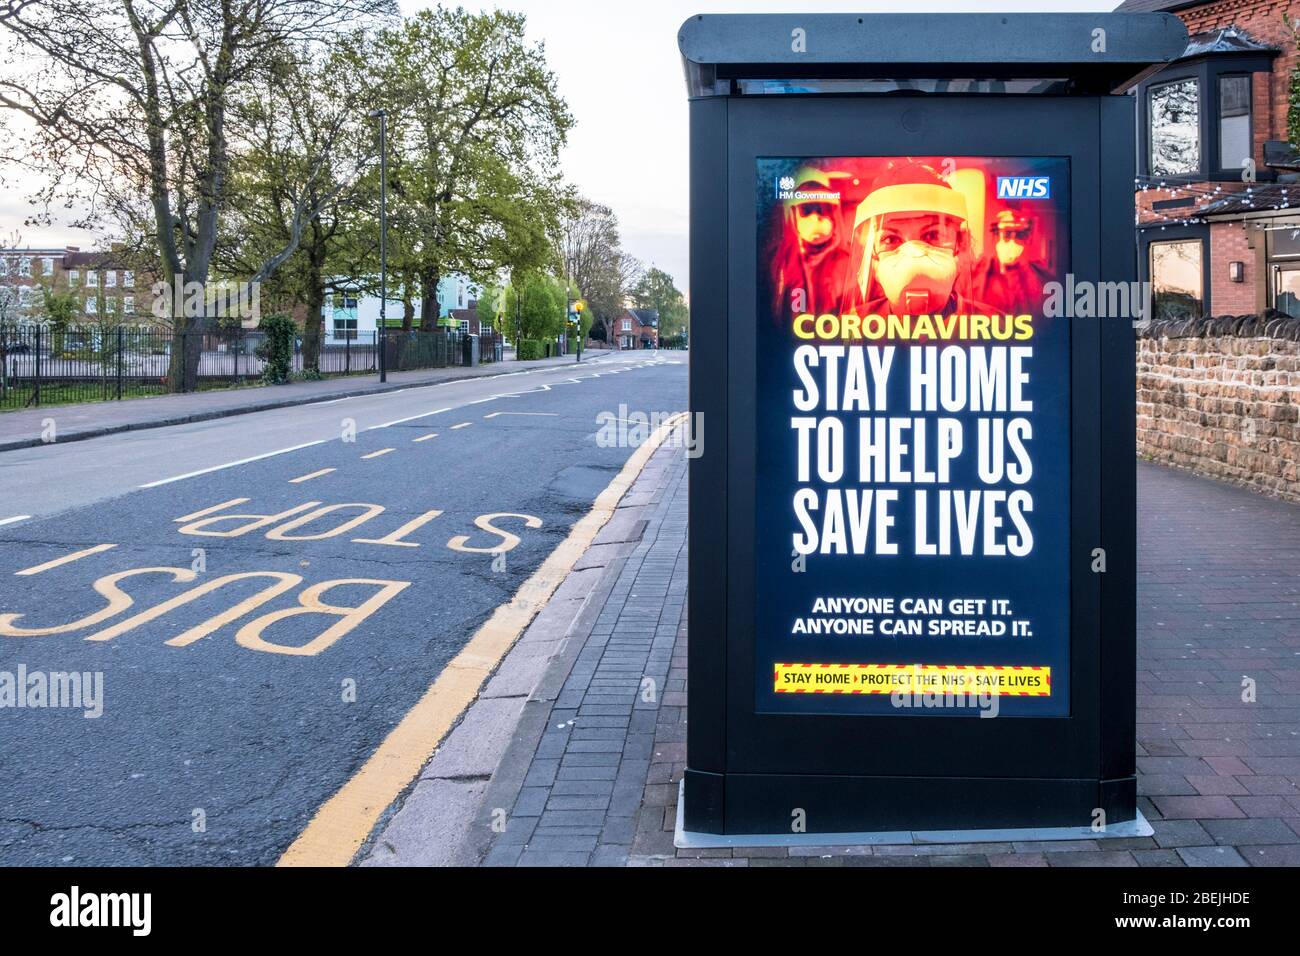 Coronavirus. Stay home to help us save lives. Covid-19 lockdown message on a bus stop shelter on an empty street, Nottinghamshire, England, UK Stock Photo